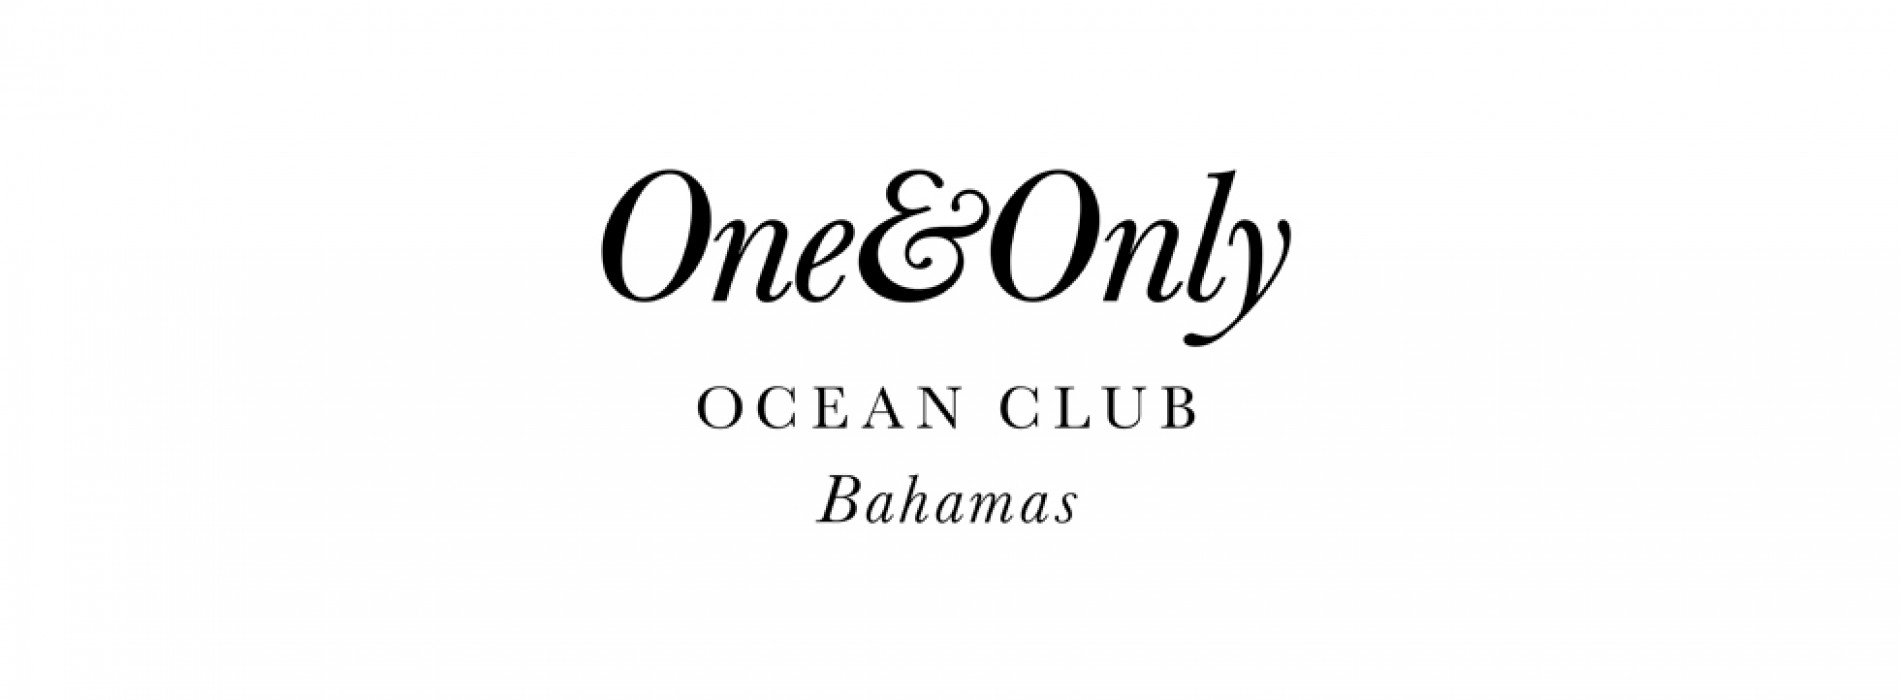 One&Only Ocean Club, Bahamas Rediscovered